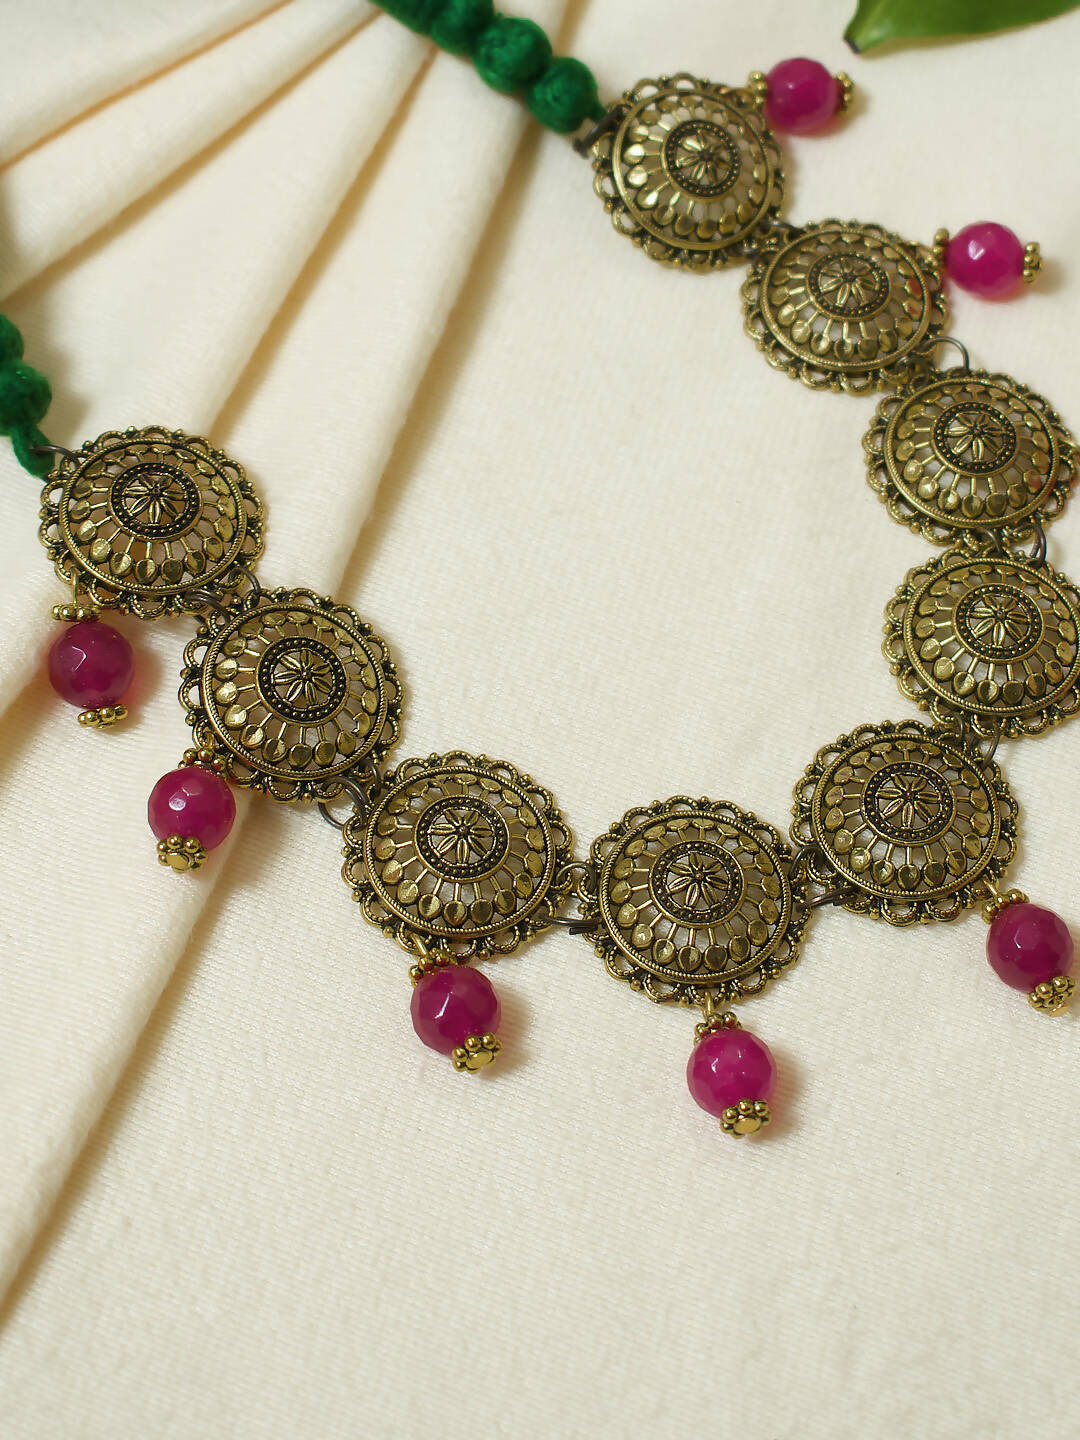 Handmade Gold metal look alike Evening Dinner Party Minimalistic Necklace set with Red Beads - SWARNALI Wemy Store